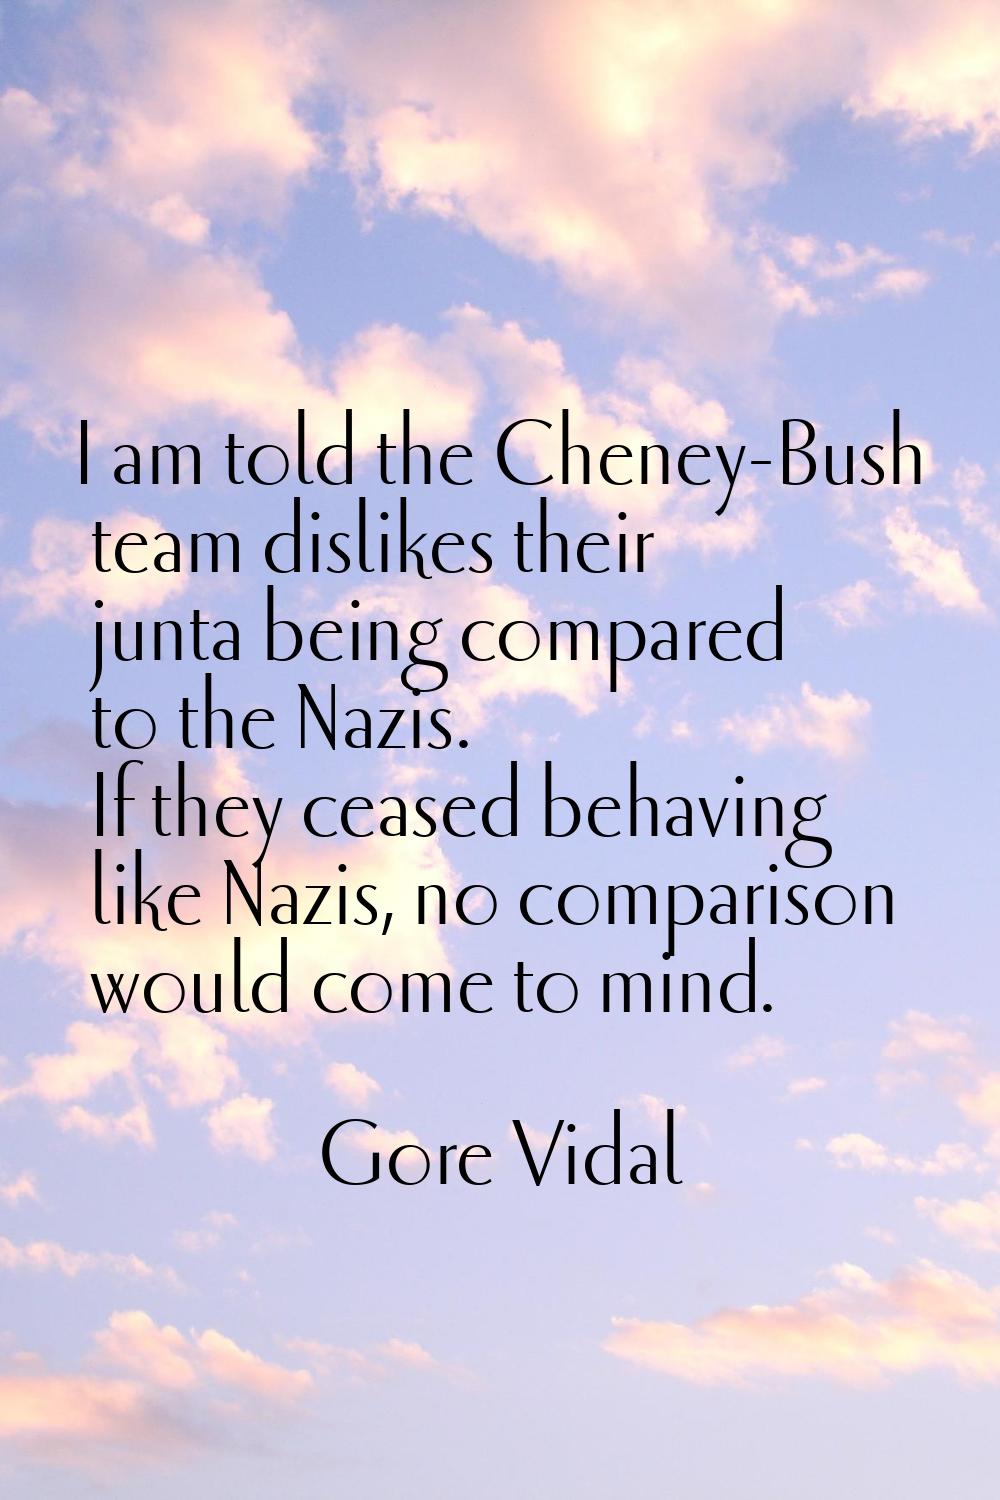 I am told the Cheney-Bush team dislikes their junta being compared to the Nazis. If they ceased beh